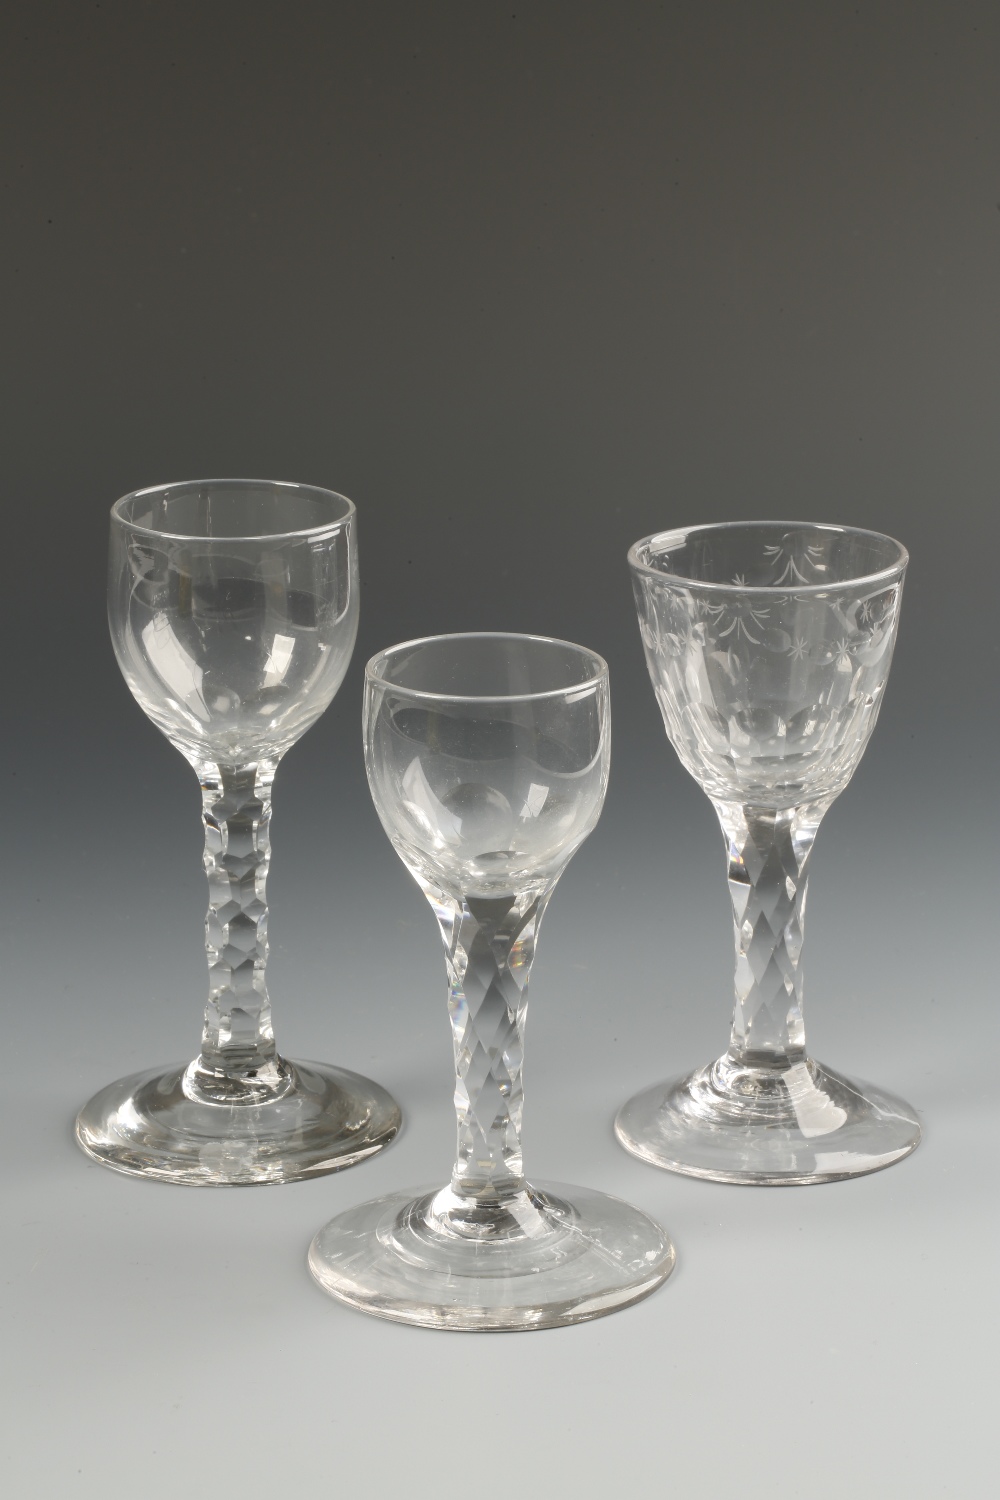 AN 18TH CENTURY WINE GLASS with faceted stem, the bowl with panel-cut base and egg and dart